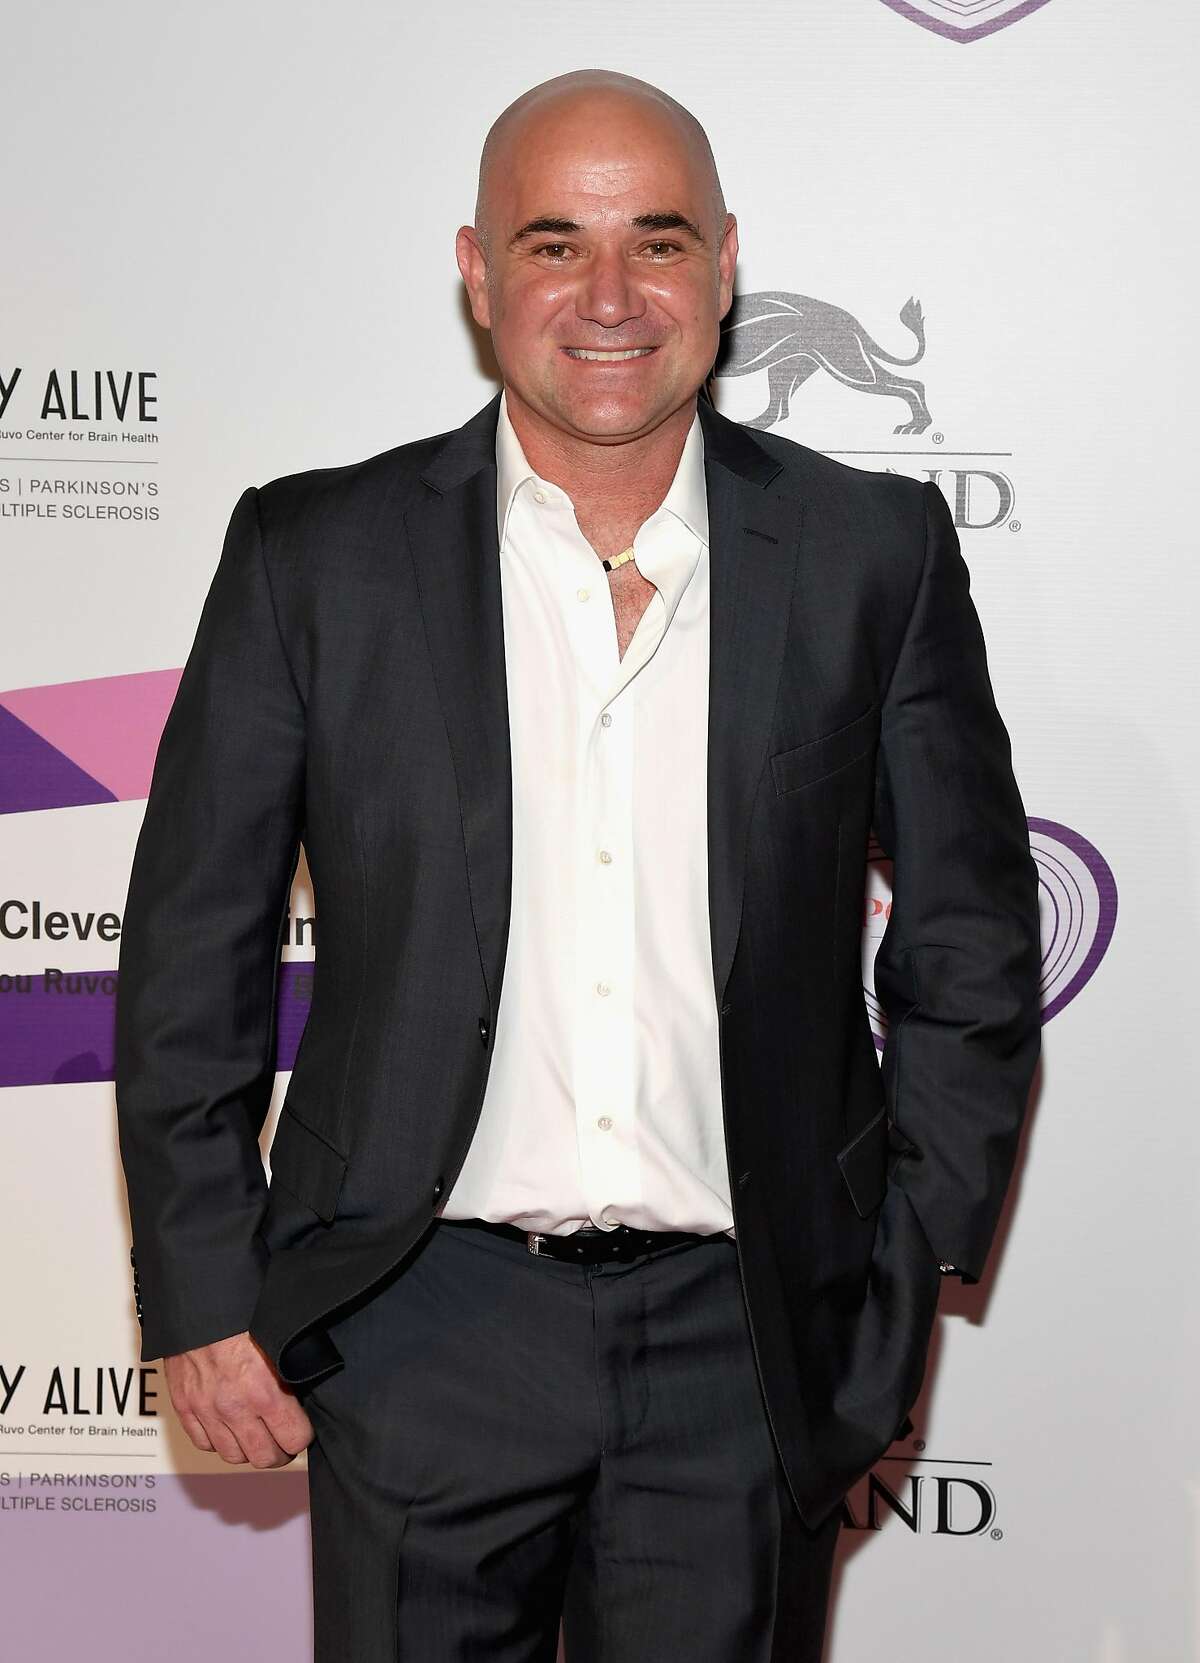 LAS VEGAS, NV - APRIL 27: Former tennis player and Community Achievement Award recipient Andre Agassi attends the 21st annual Keep Memory Alive "Power of Love Gala" benefit for the Cleveland Clinic Lou Ruvo Center for Brain Health honoring Ronald O. Perelman at MGM Grand Garden Arena on April 27, 2017 in Las Vegas, Nevada. (Photo by Ethan Miller/Getty Images for Keep Memory Alive)